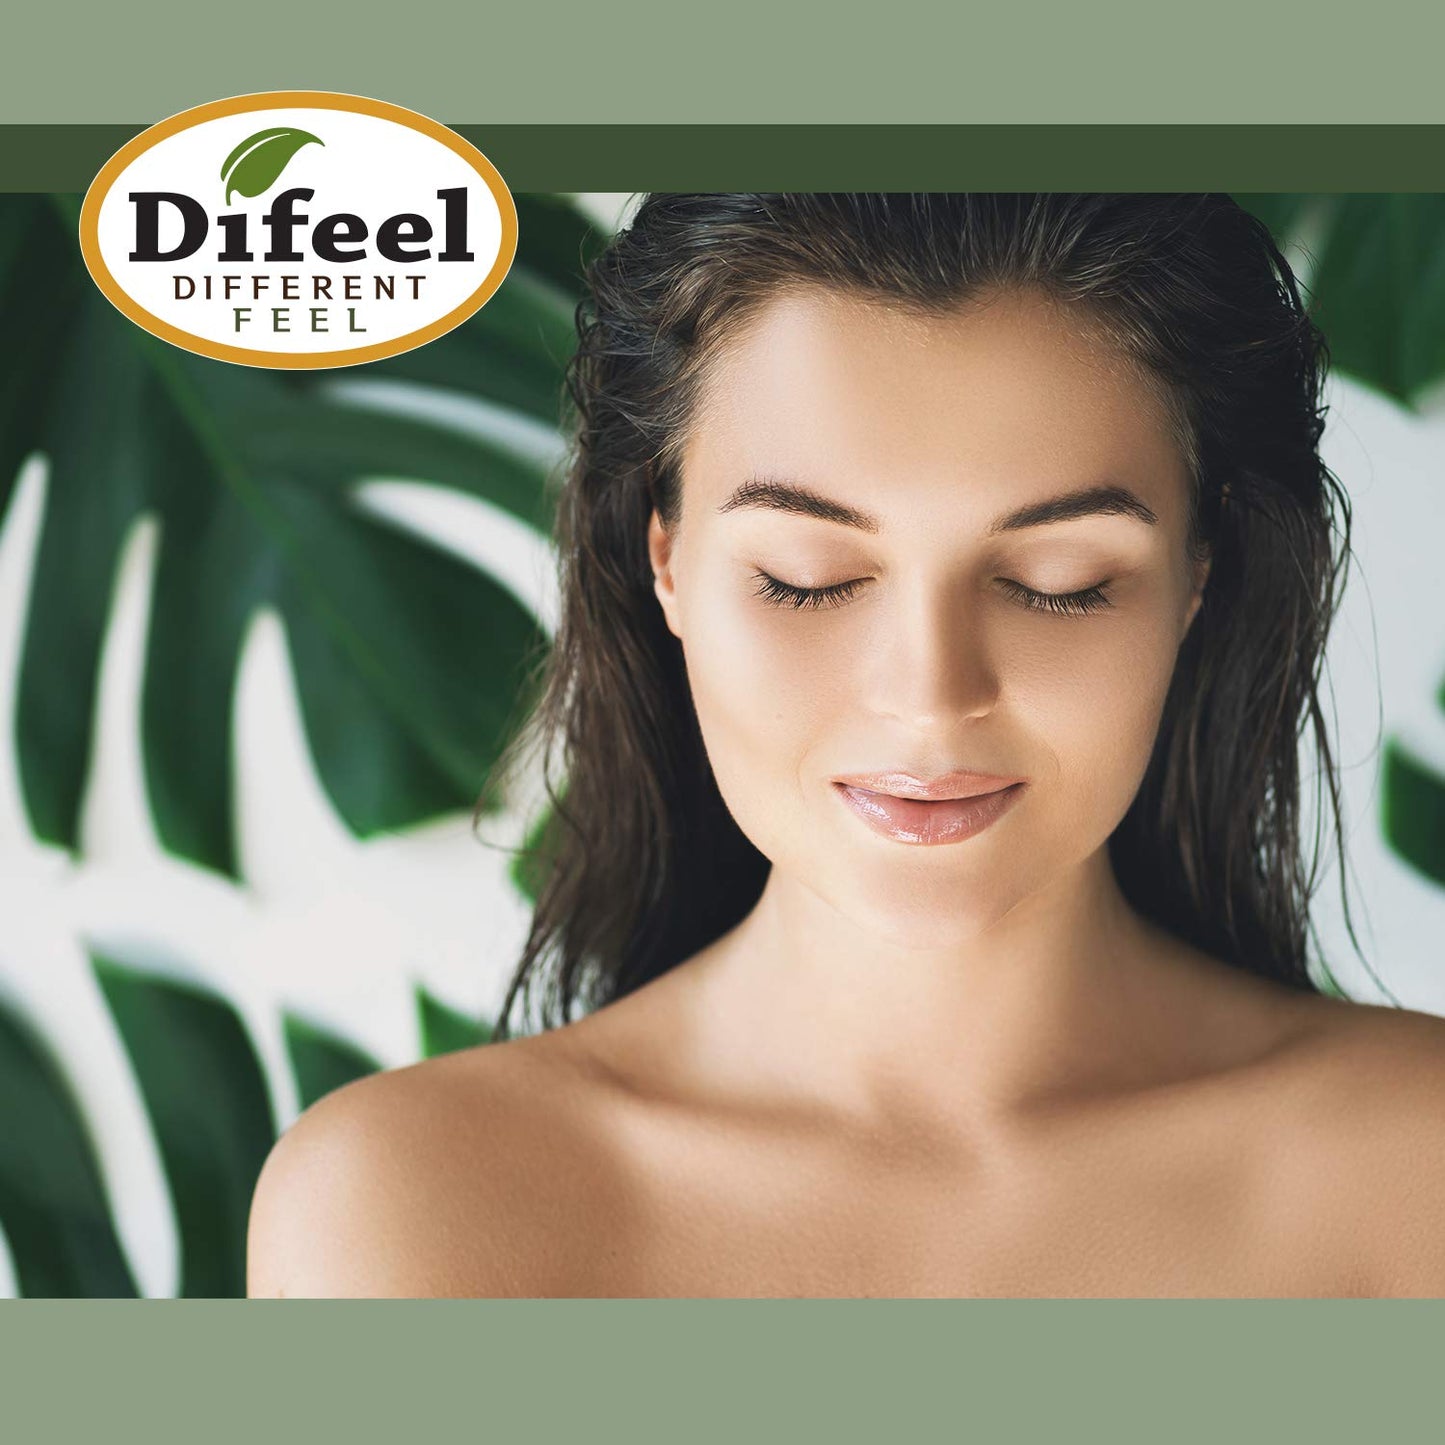 Difeel Ultra Growth Basil & Castor Oil Pro Growth Conditioner 12 oz. by difeel - find your natural beauty